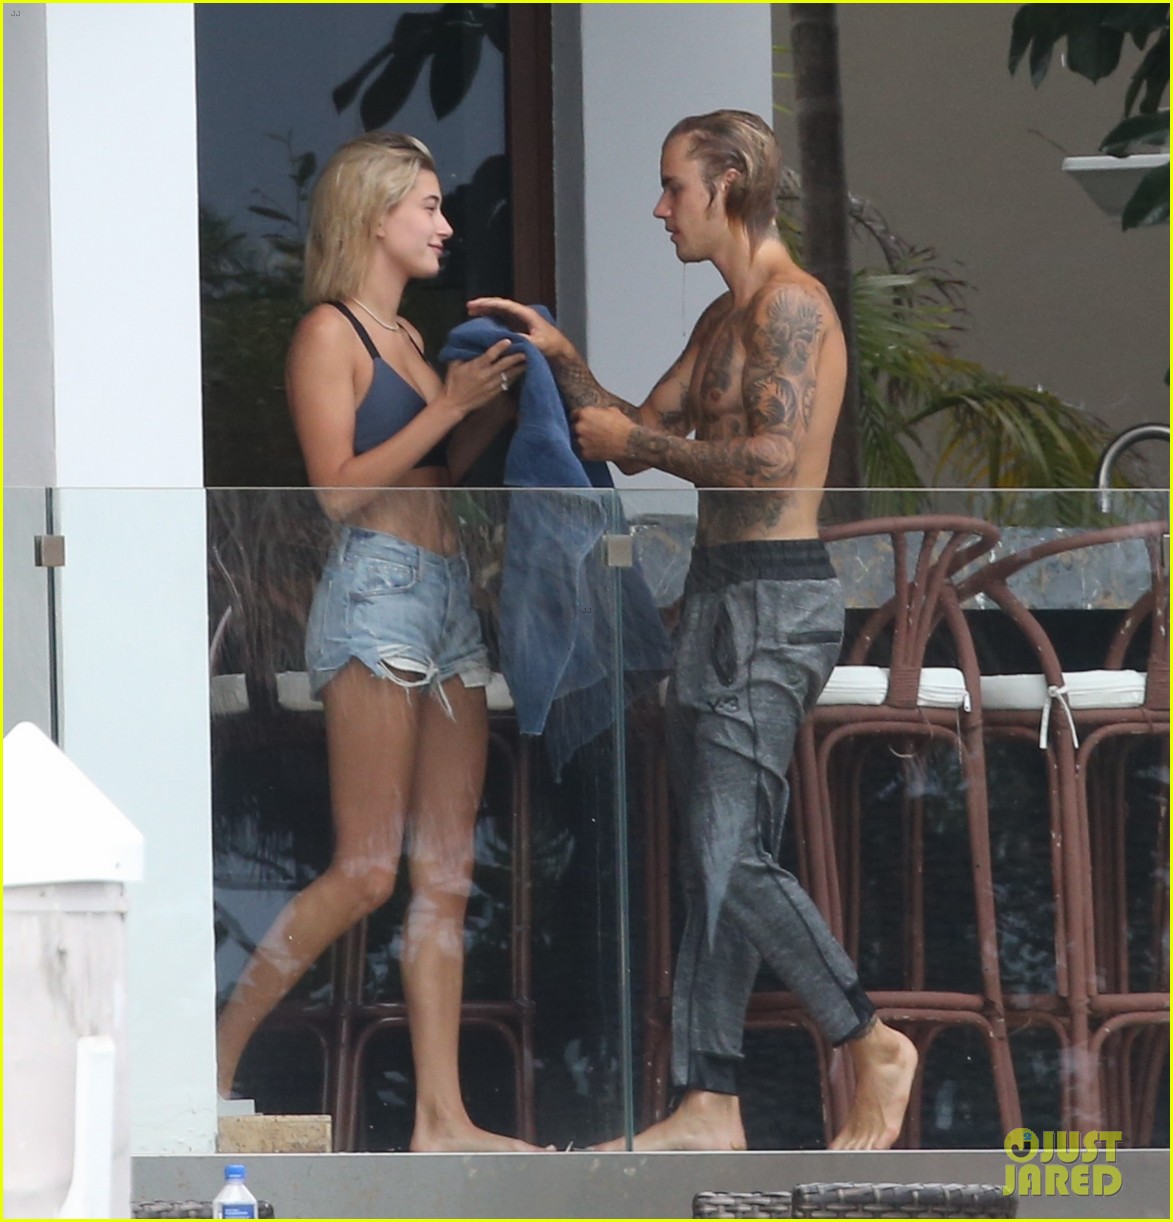 justin bieber gets cozy in miami with hailey baldwin 01